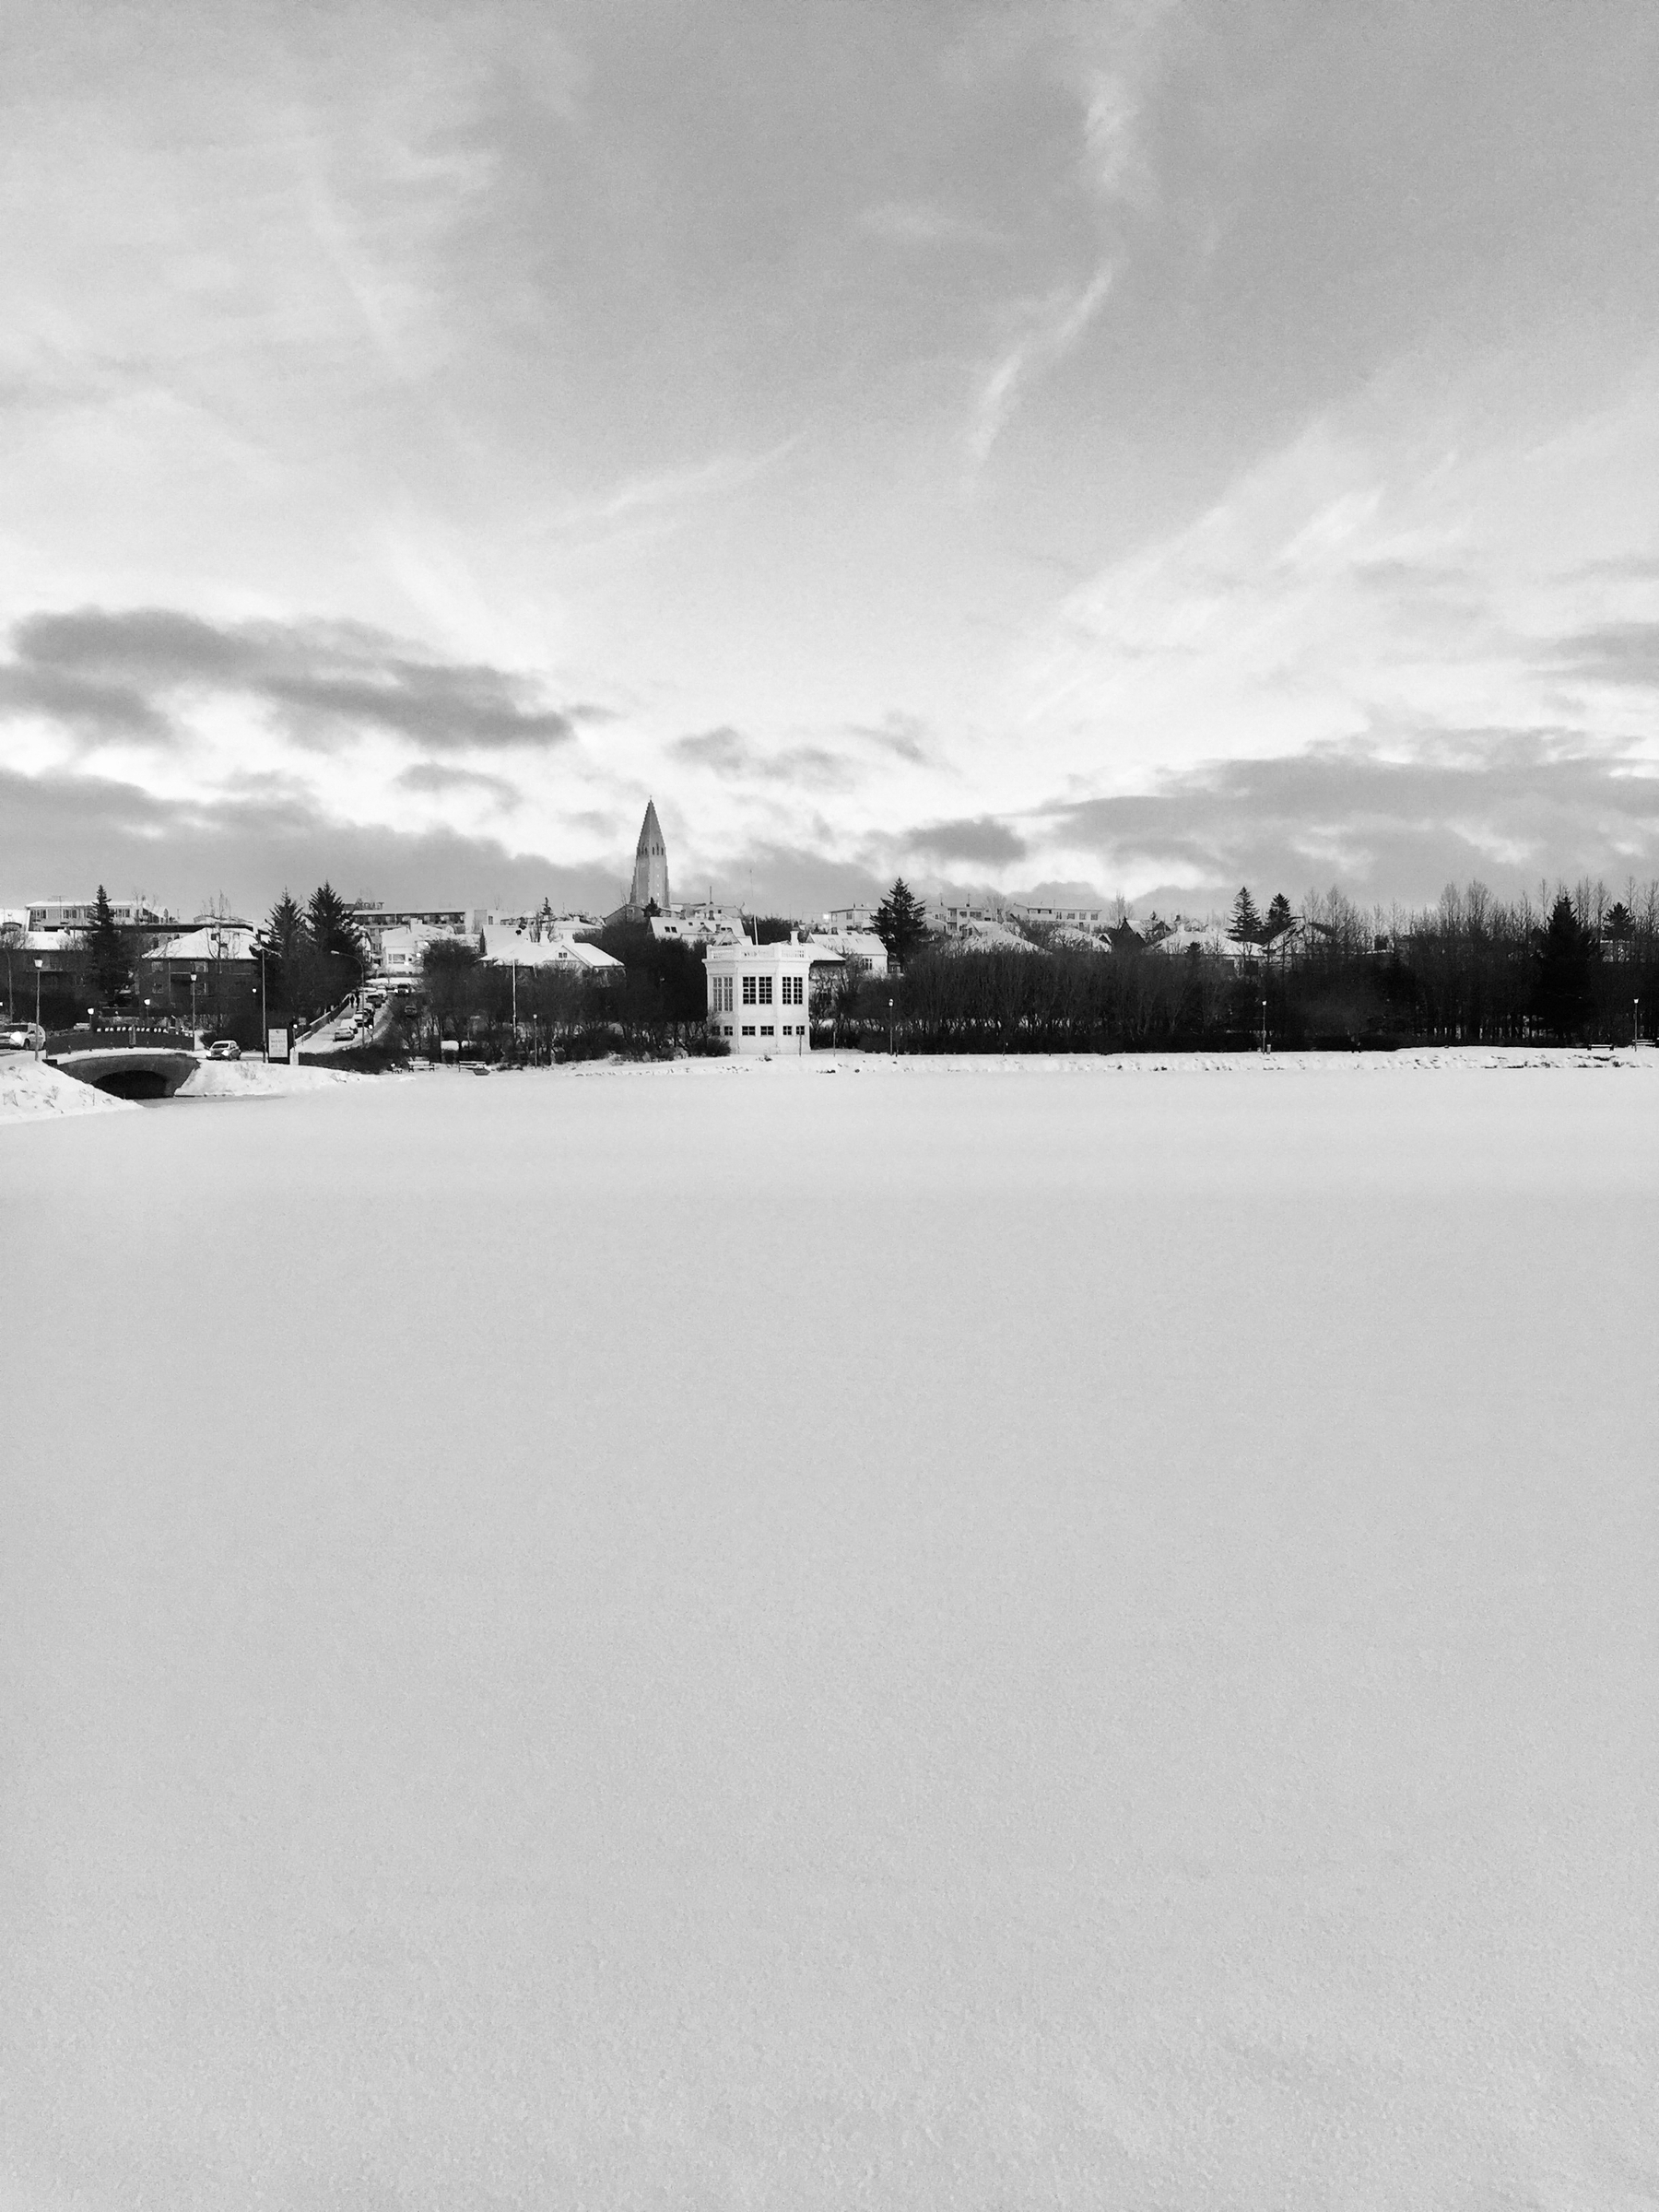 A view over the frozen pond in Reykjavík. You can see Hallgrímskirkja in the distance.